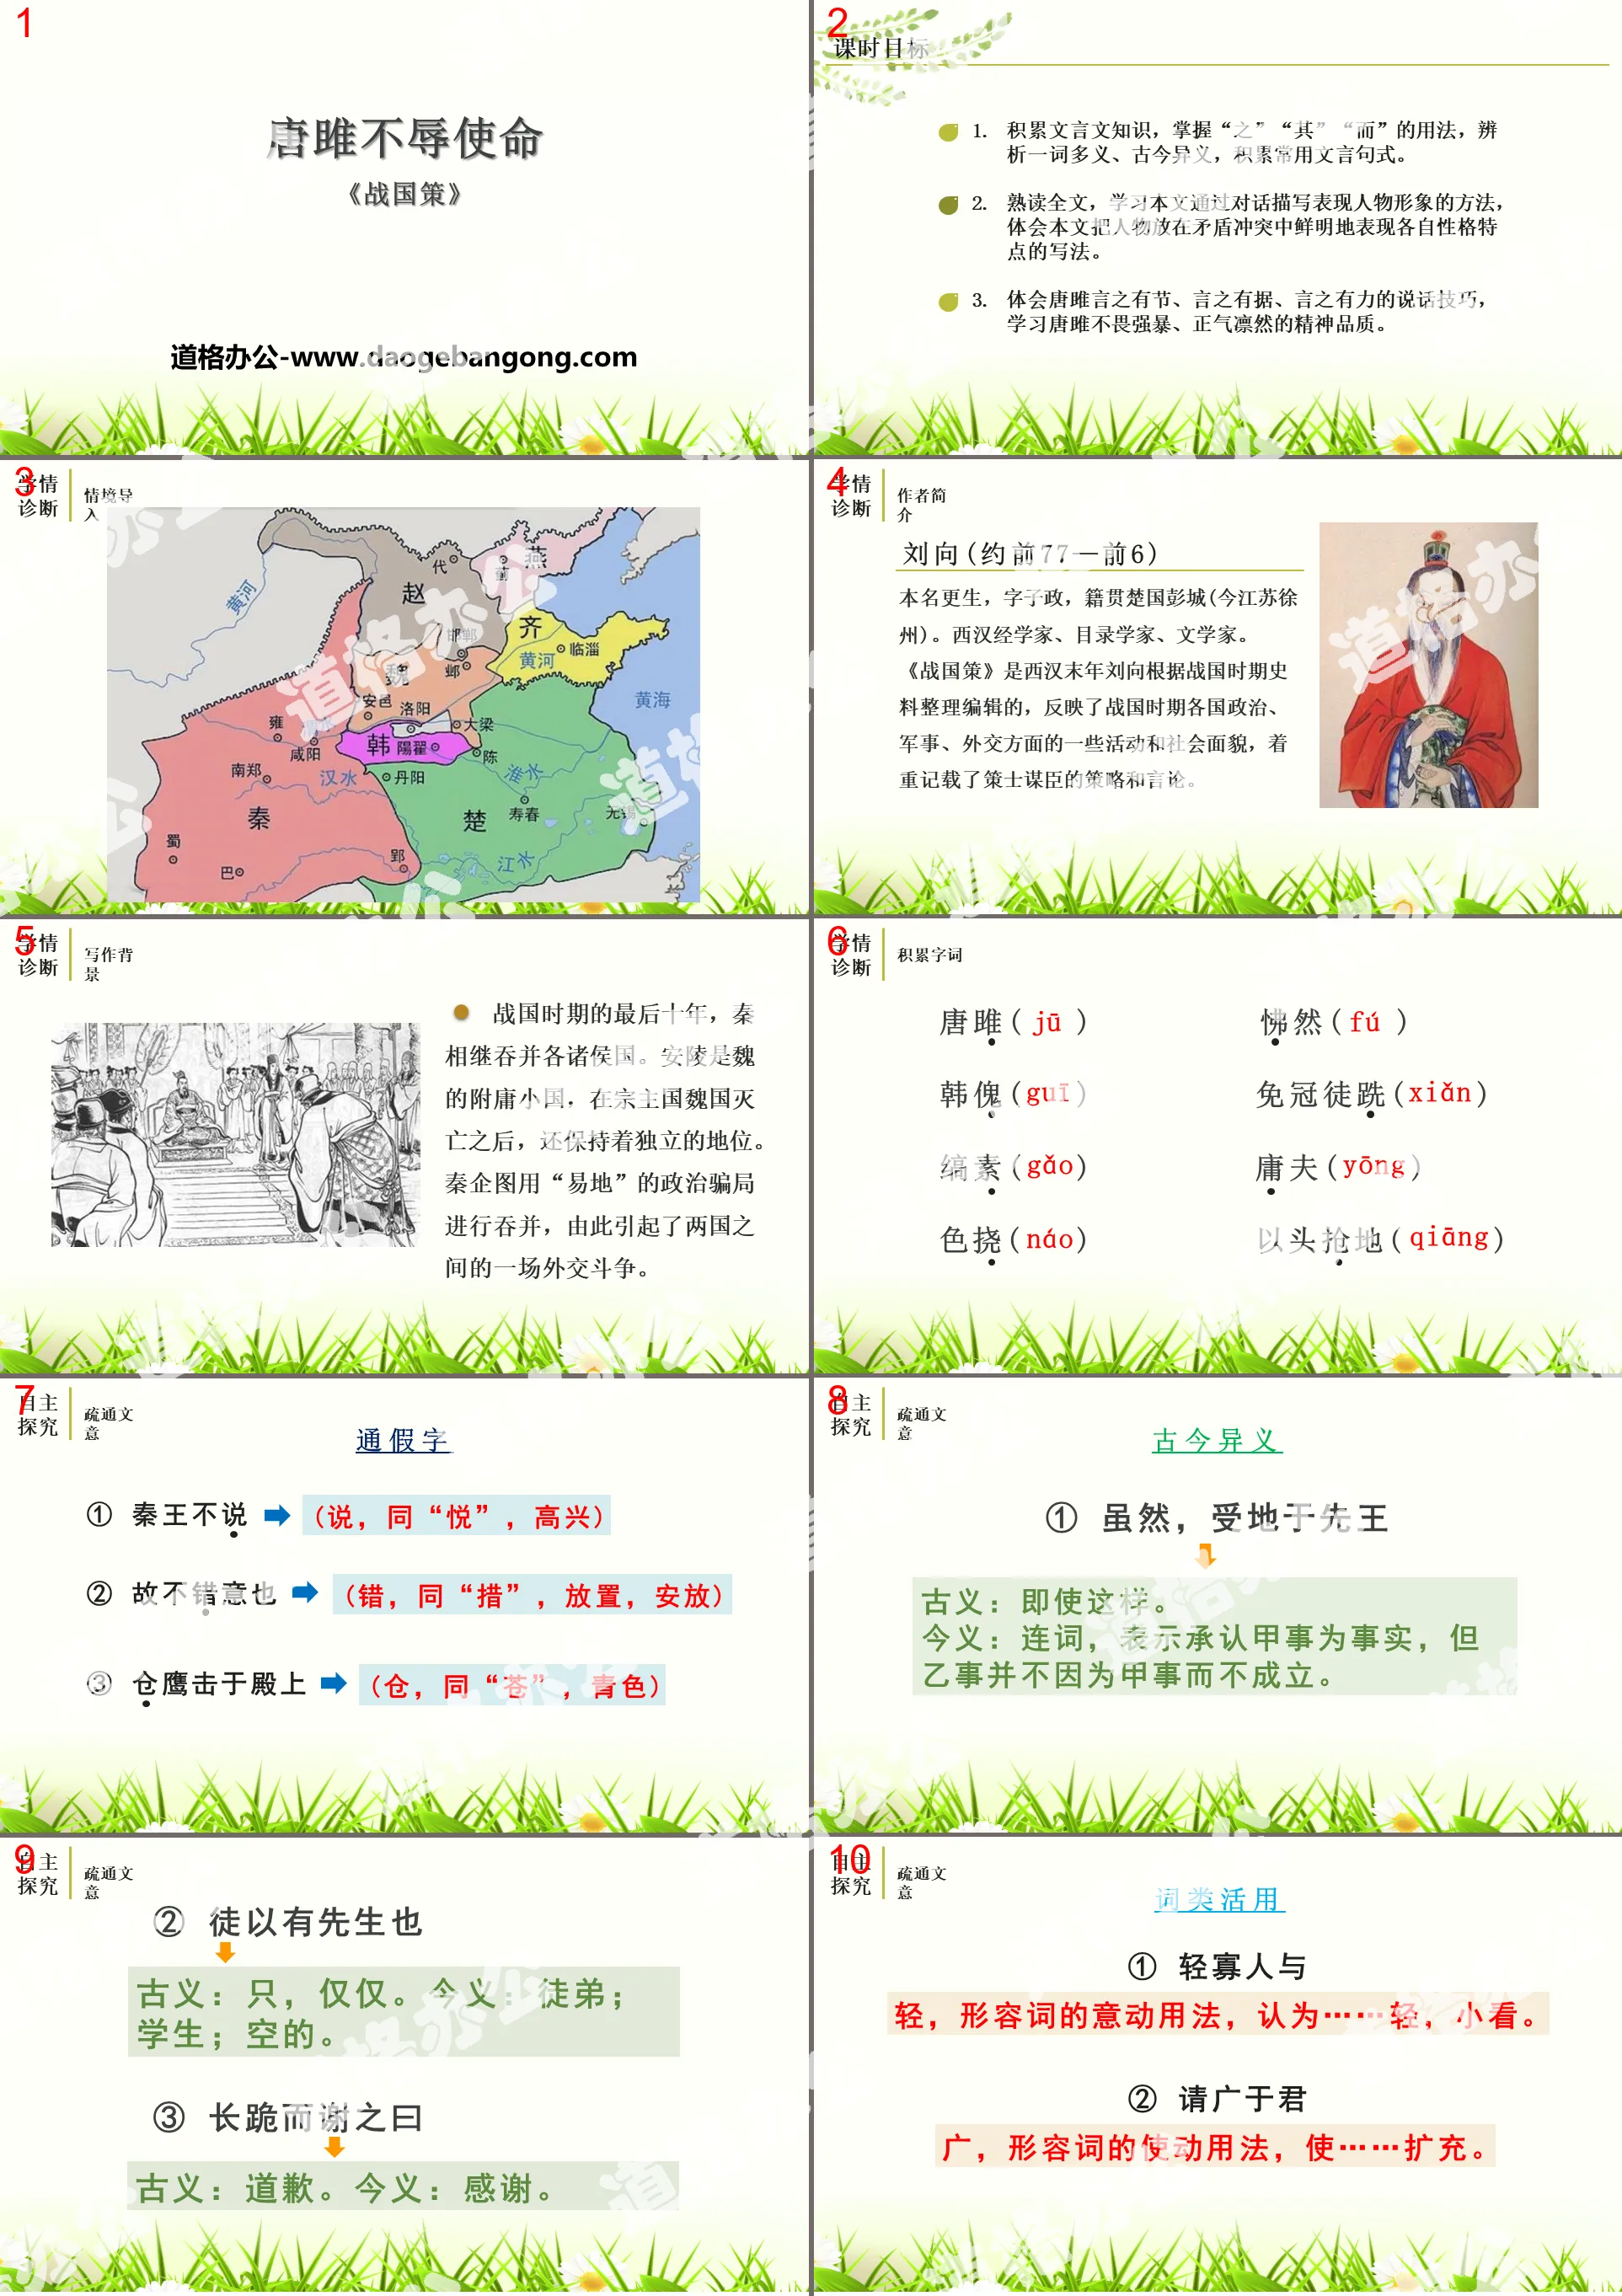 "Tang Ju Fulfills His Mission" PPT teaching courseware